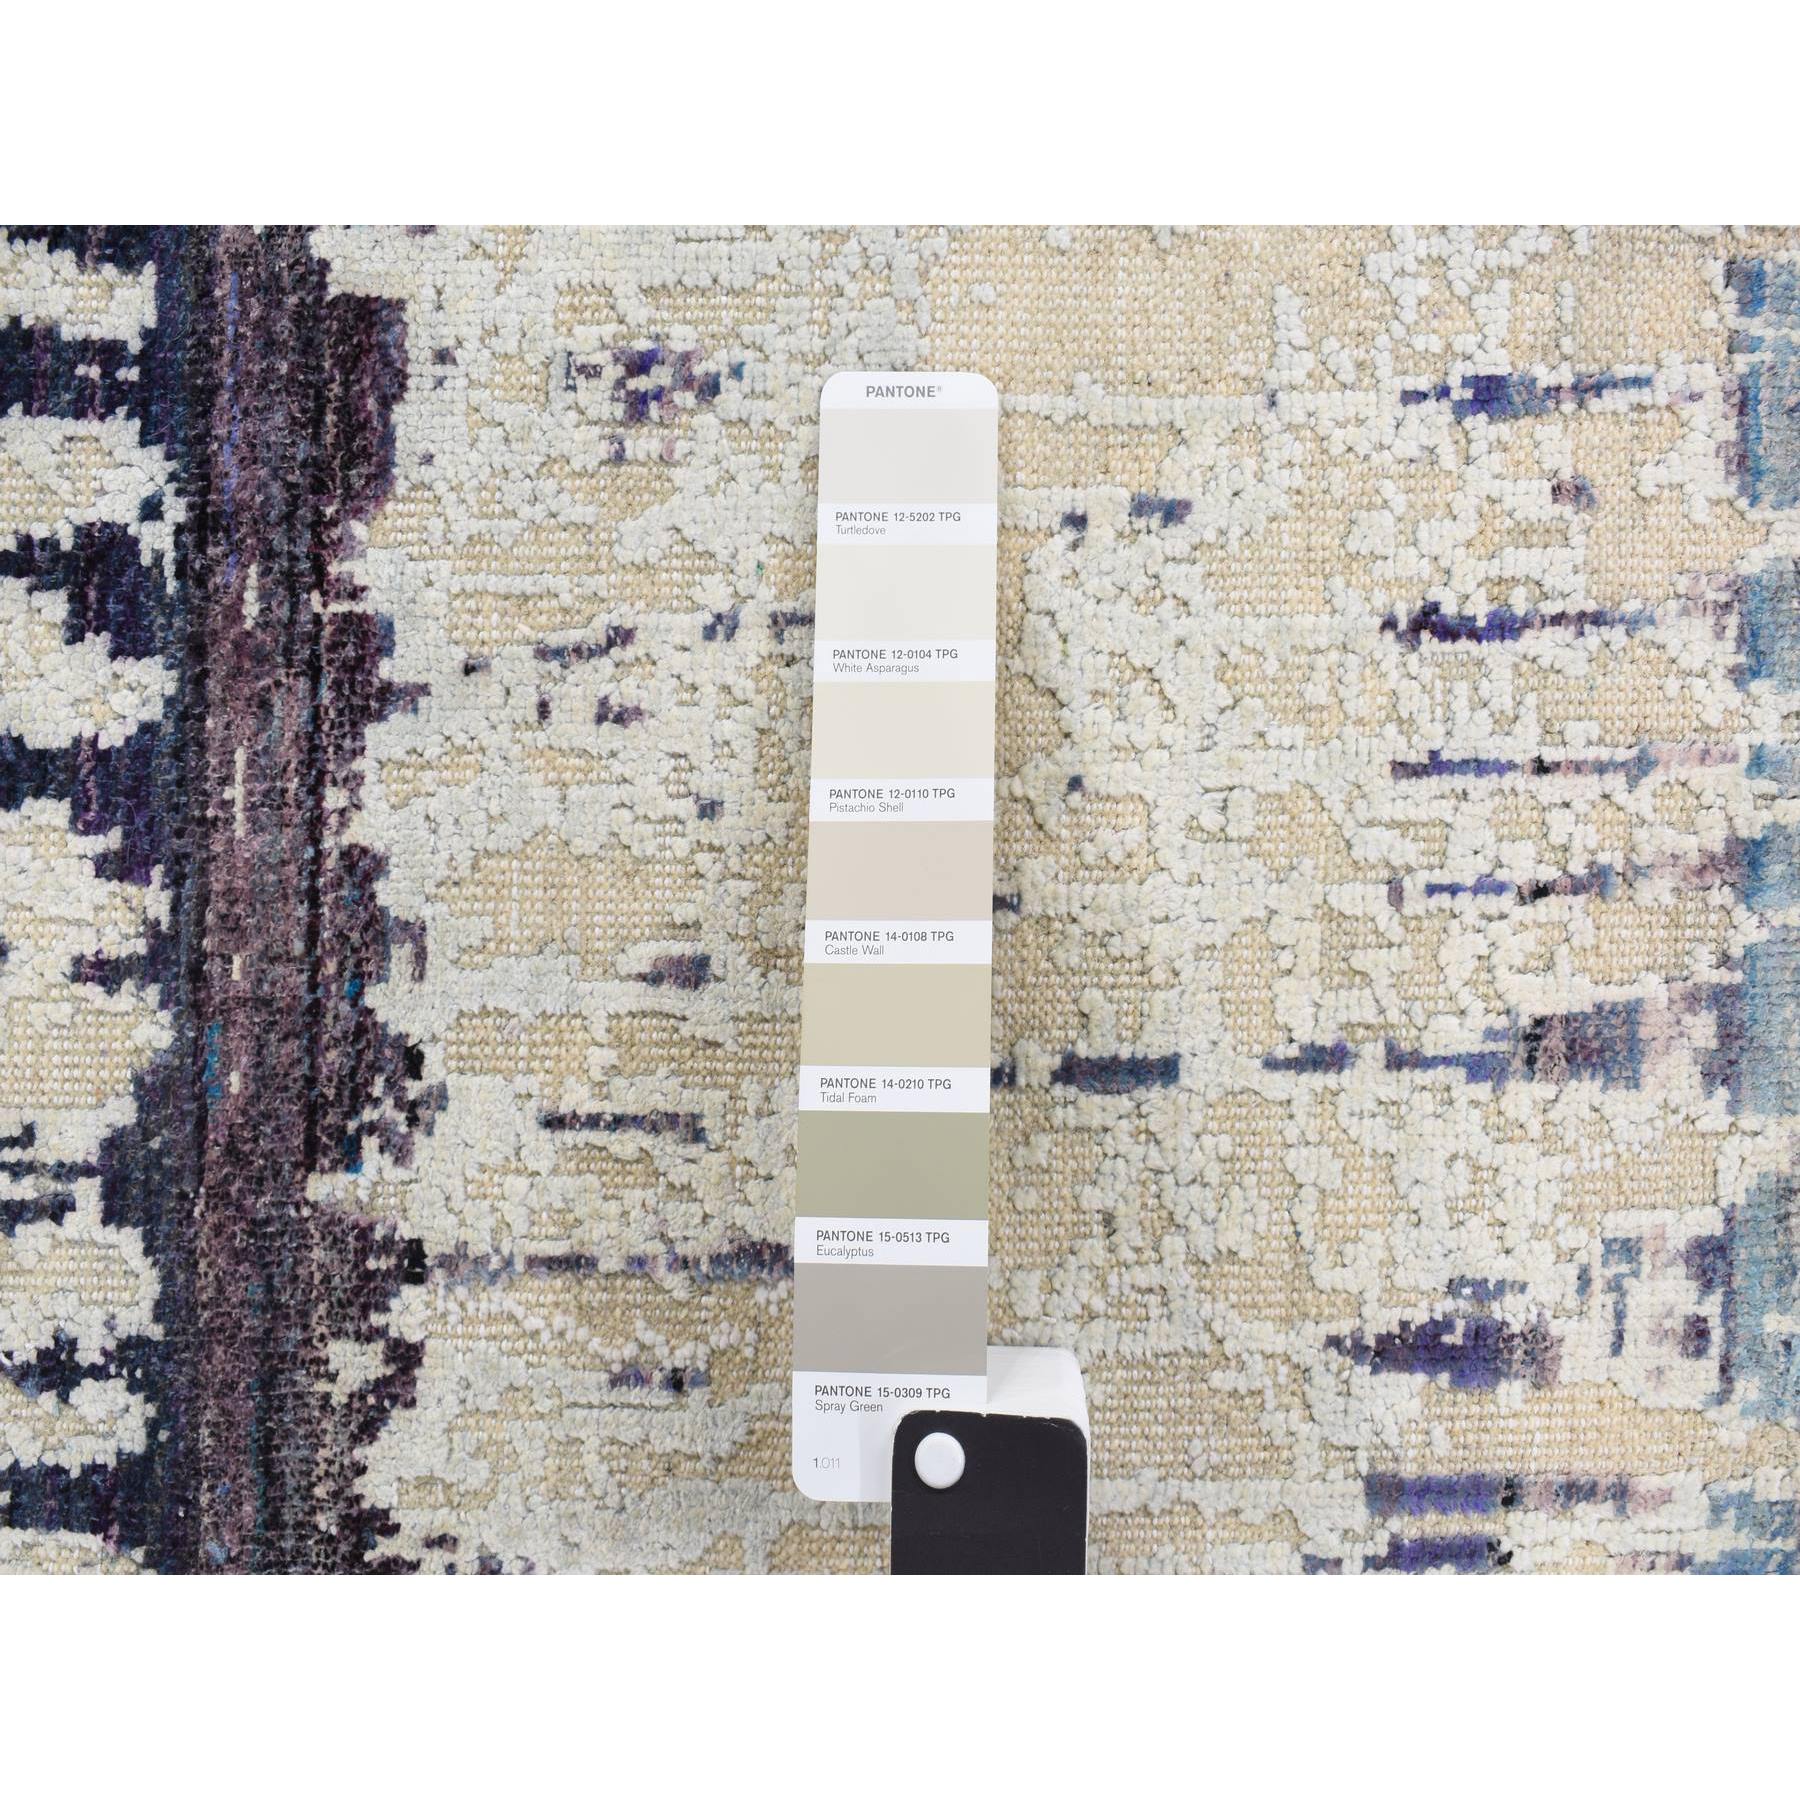  Silk Hand-Knotted Area Rug 2'0